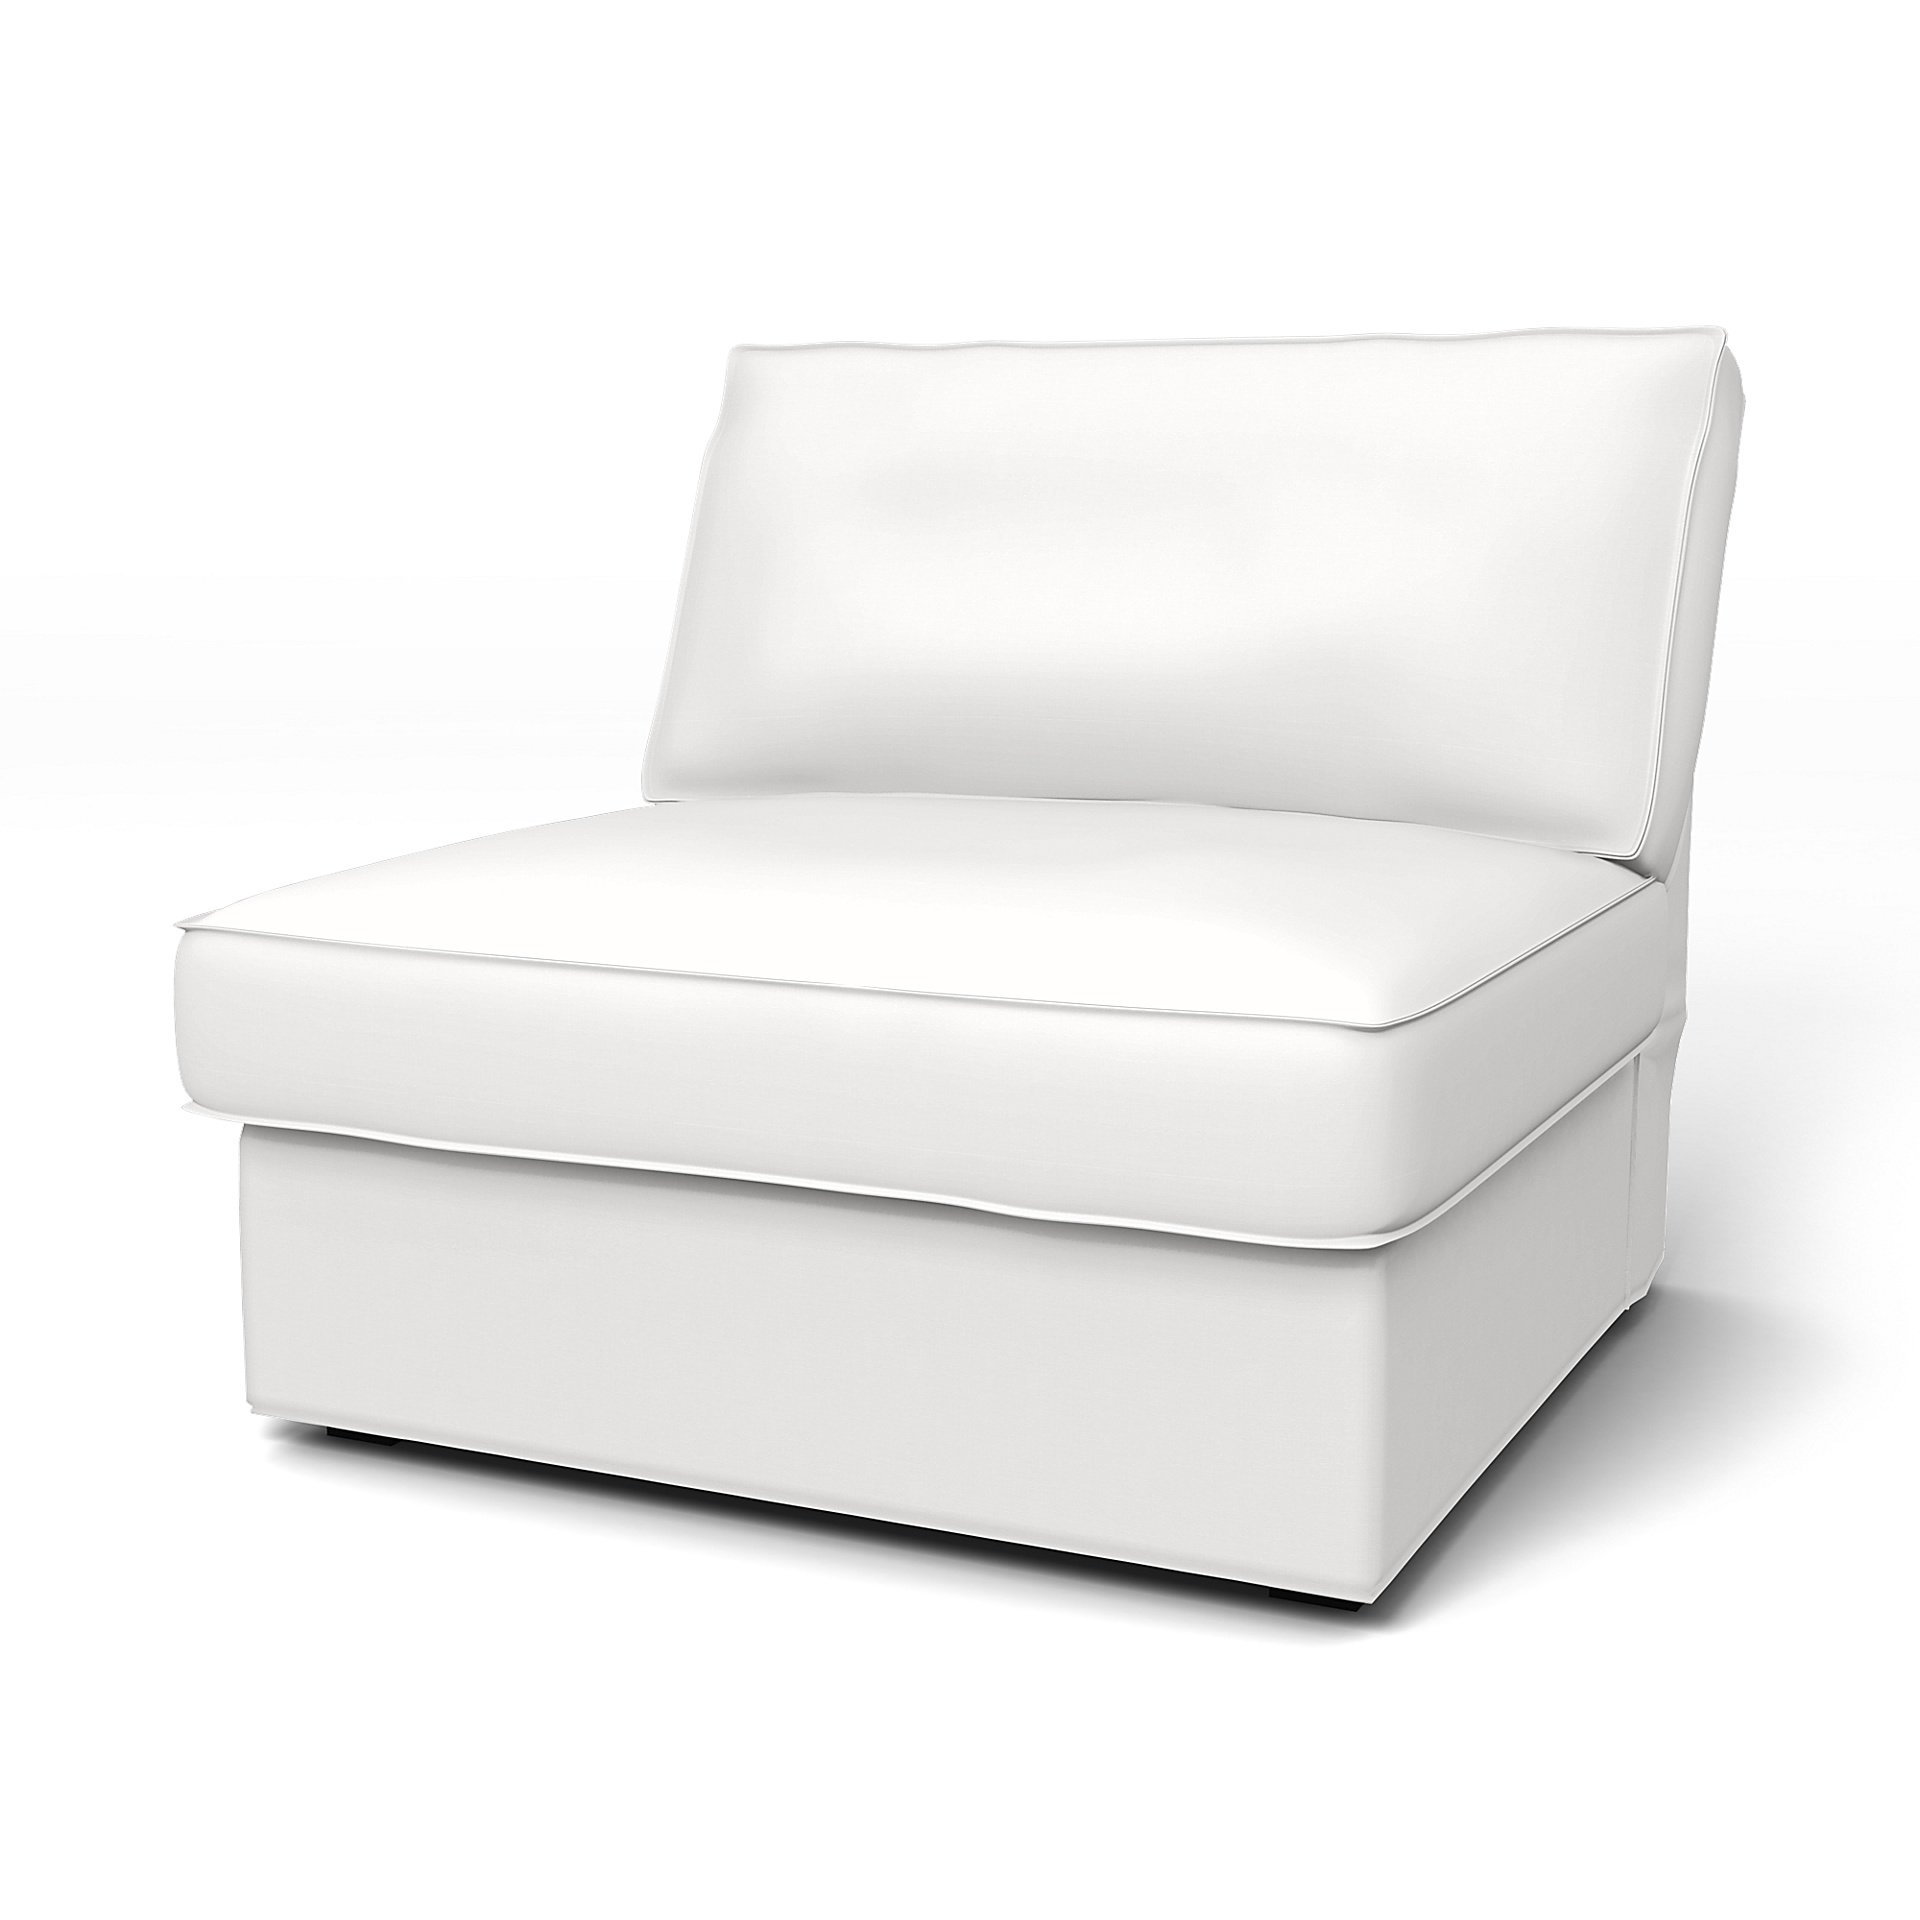 IKEA - Kivik 1 Seater Chair Cover, Absolute White, Cotton - Bemz